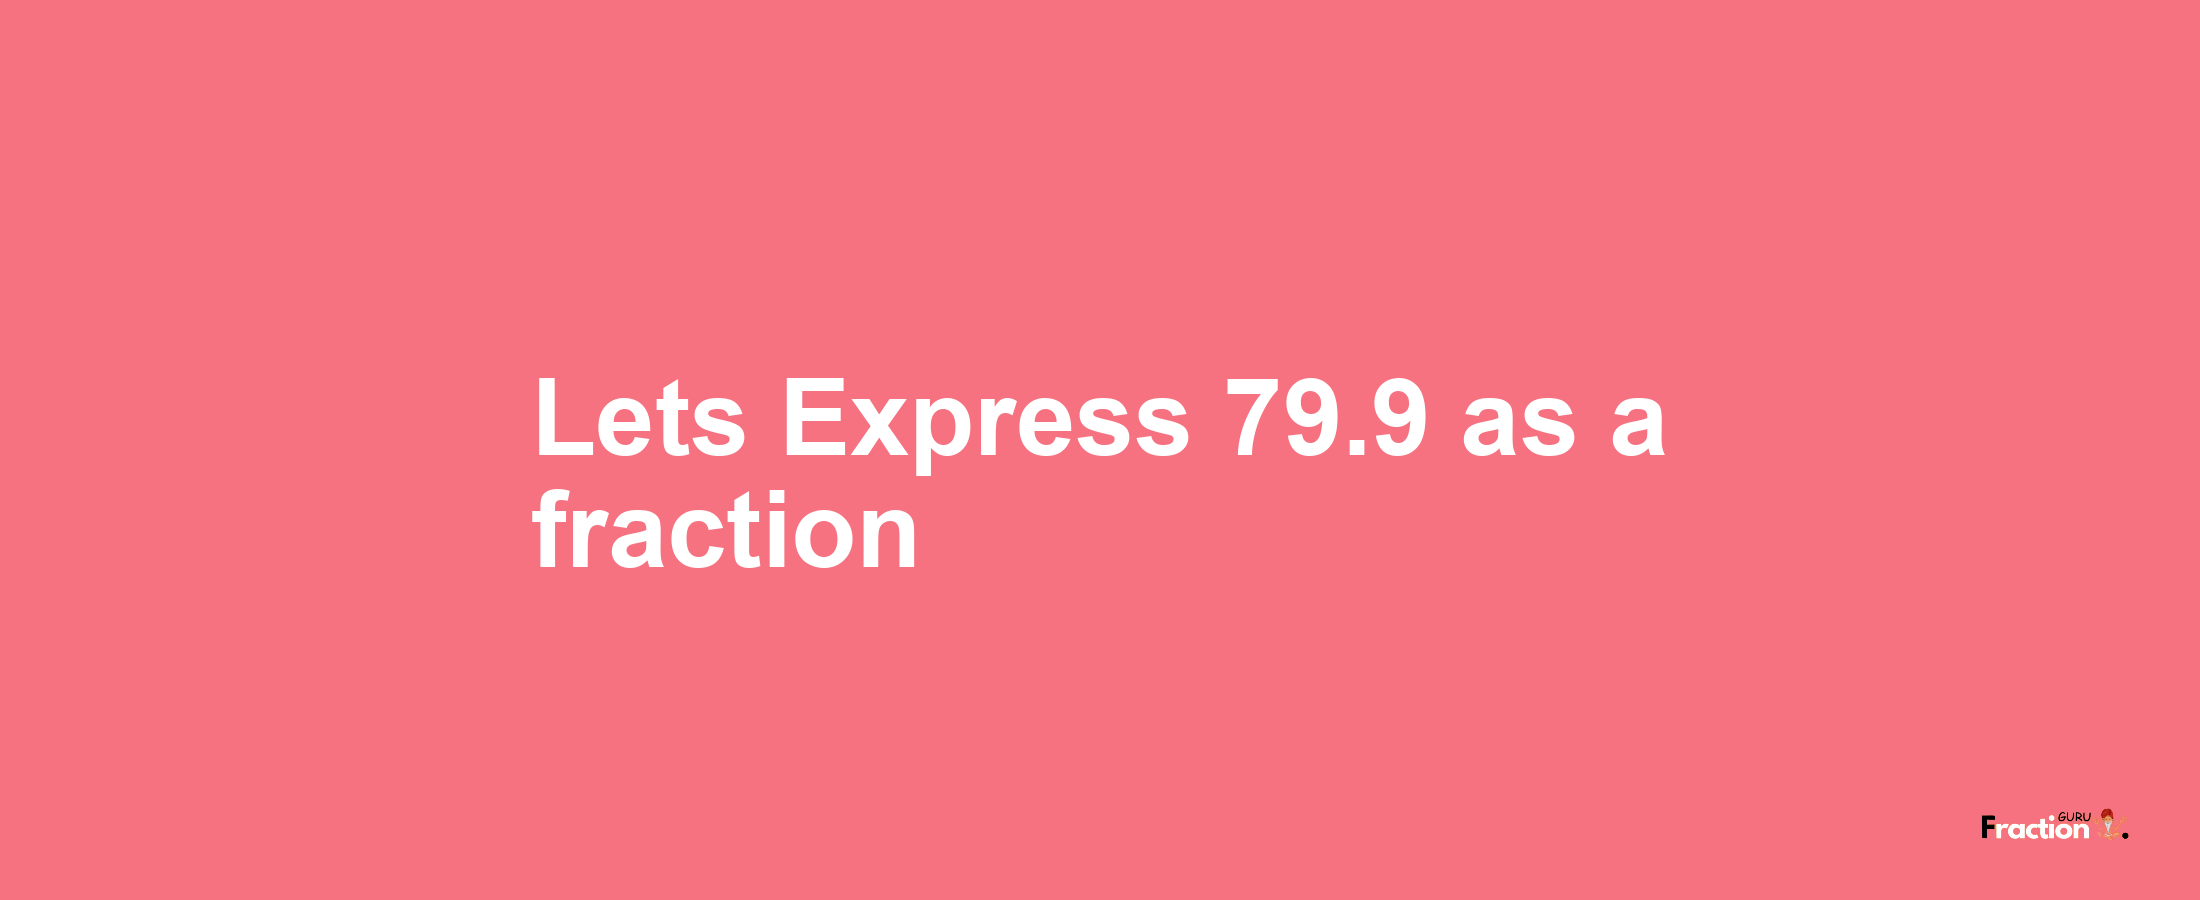 Lets Express 79.9 as afraction